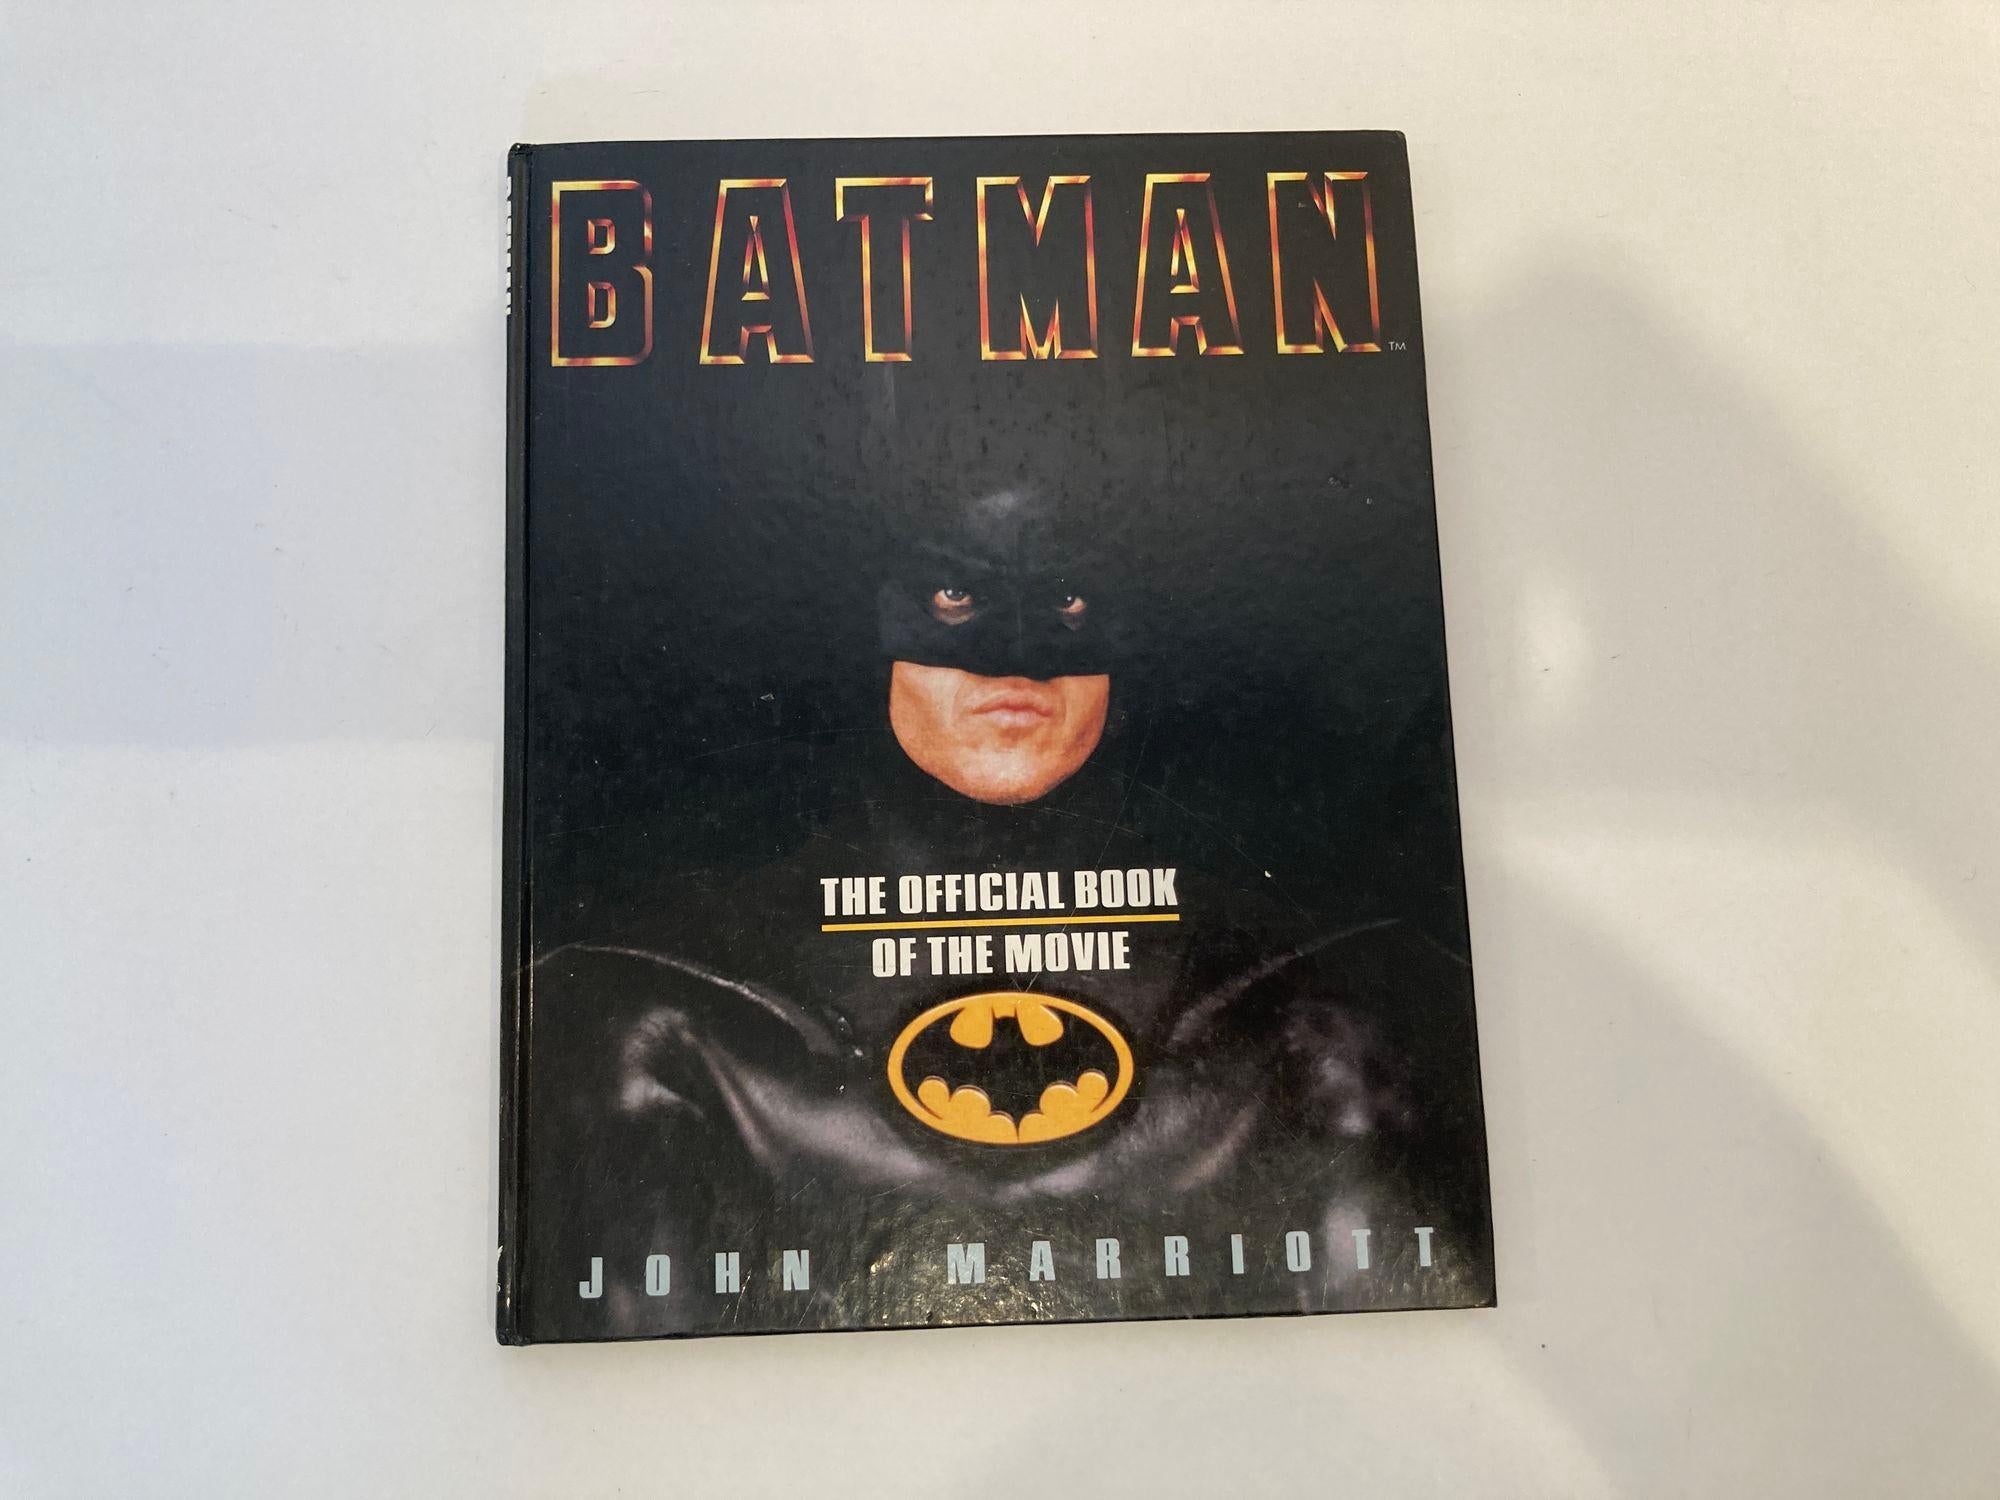 Batman: The Official Book of the Movie by John Marriott Hardcover.
Collectible book, reprint hardcover edition, 1989.
This book is absolutely must-have for every fan of Batman. Fantastic pictures and a lot of fun information to know. Could be a